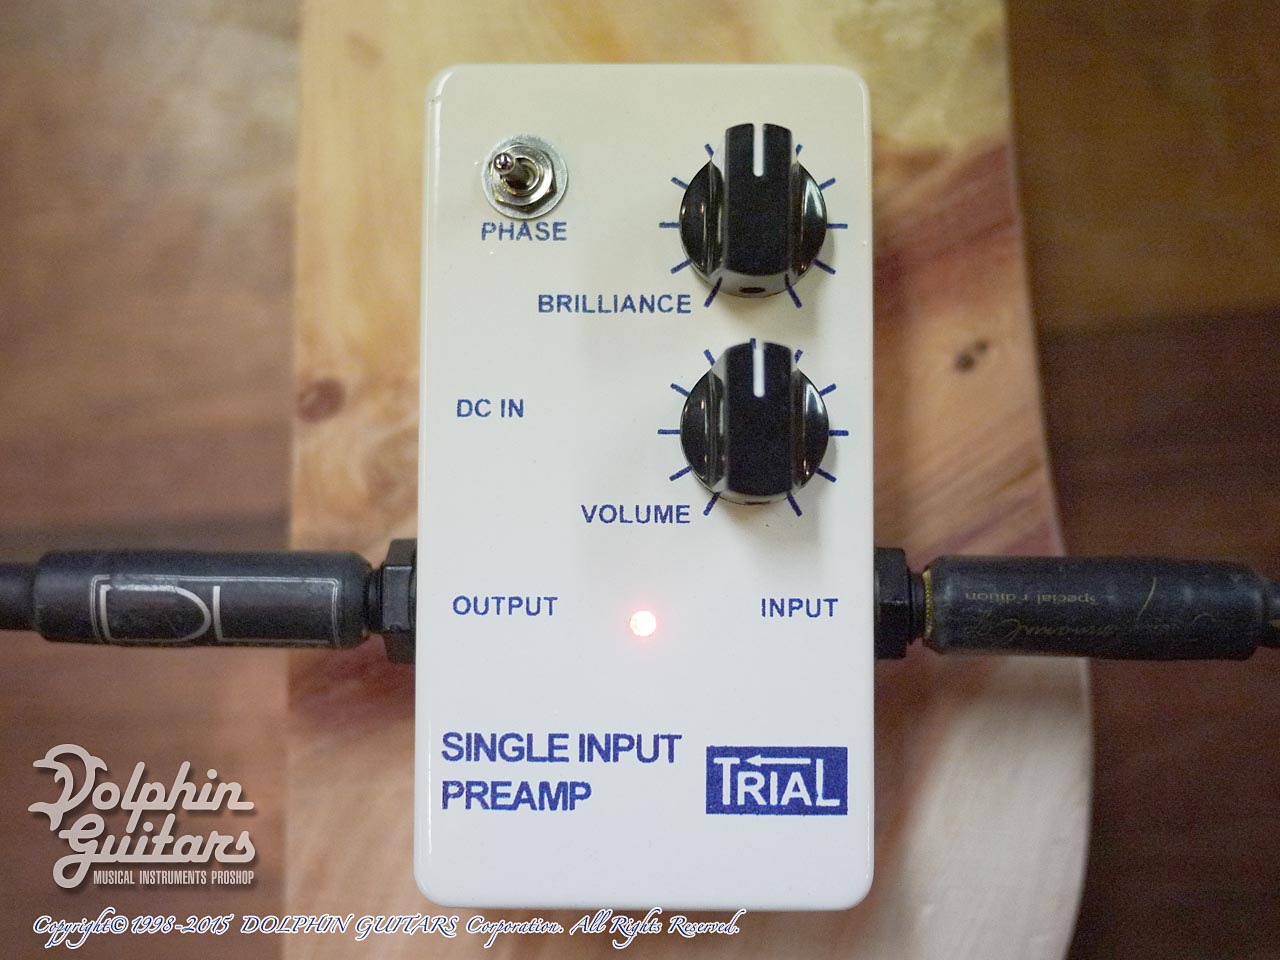 TRIAL・SINGLE INPUT PREAMP （アコースティック・ギター用シングルプリアンプ）